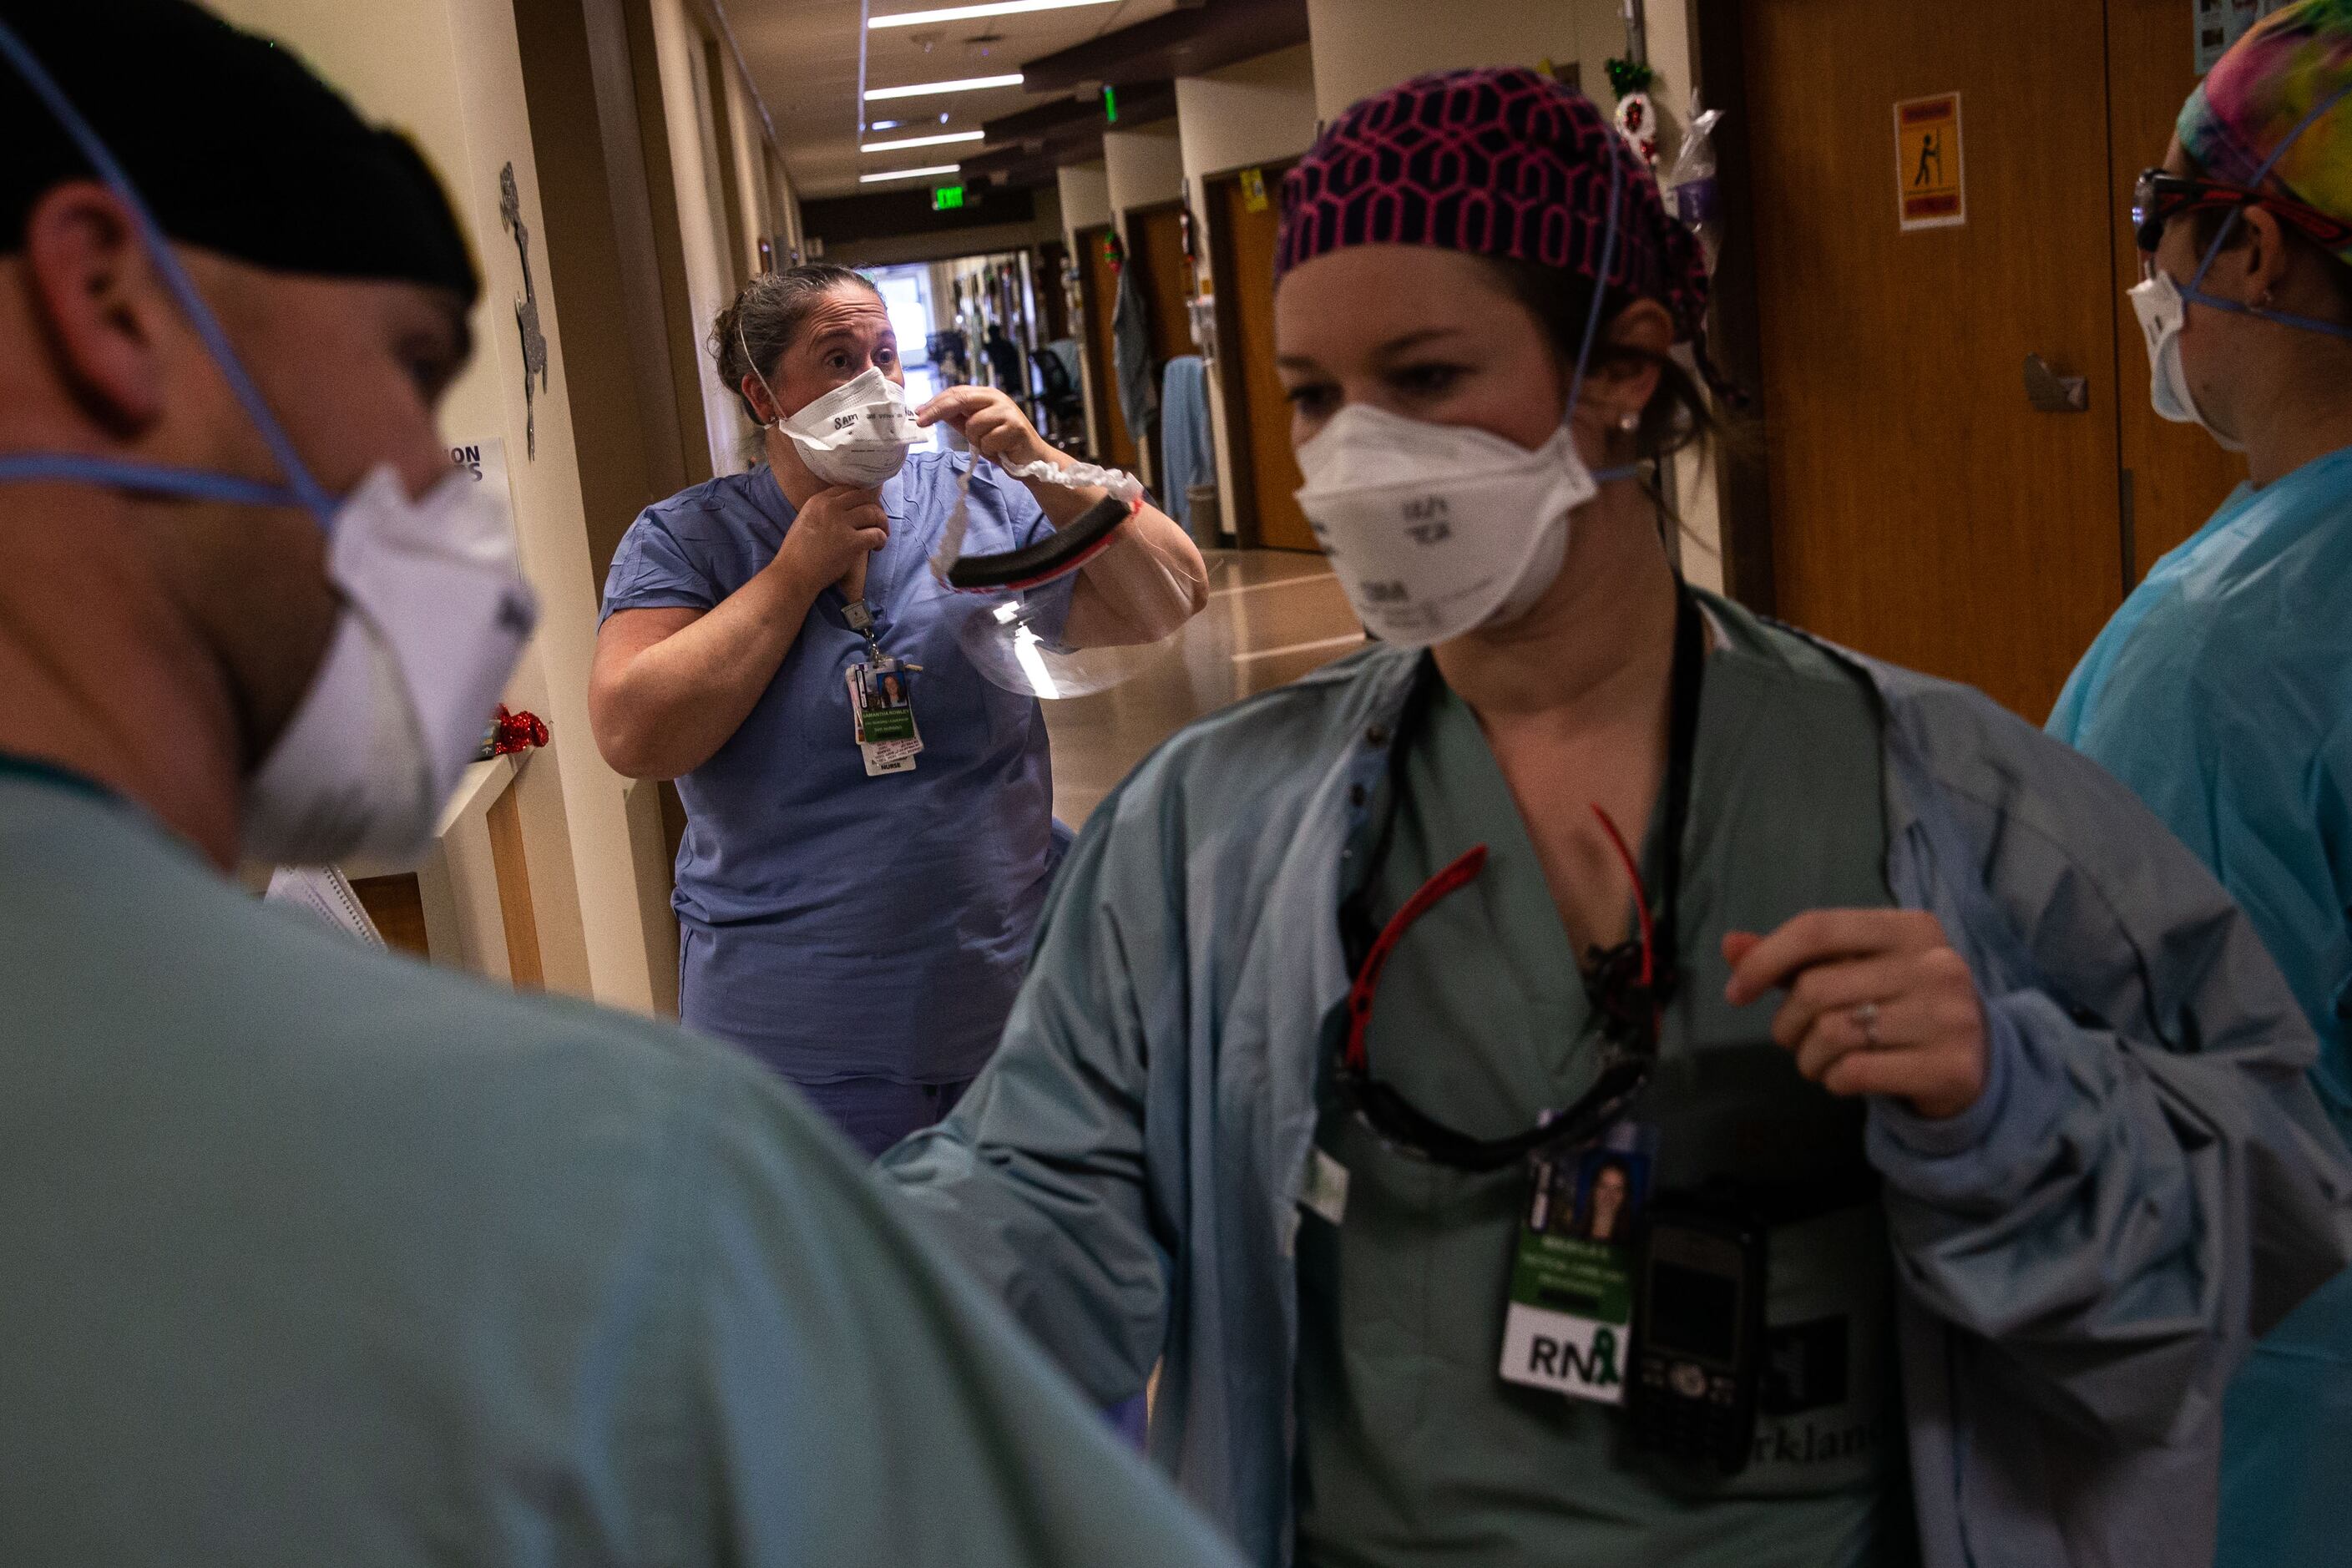 Rowley (center) suits up with personal protective equipment to help with a patient’s...